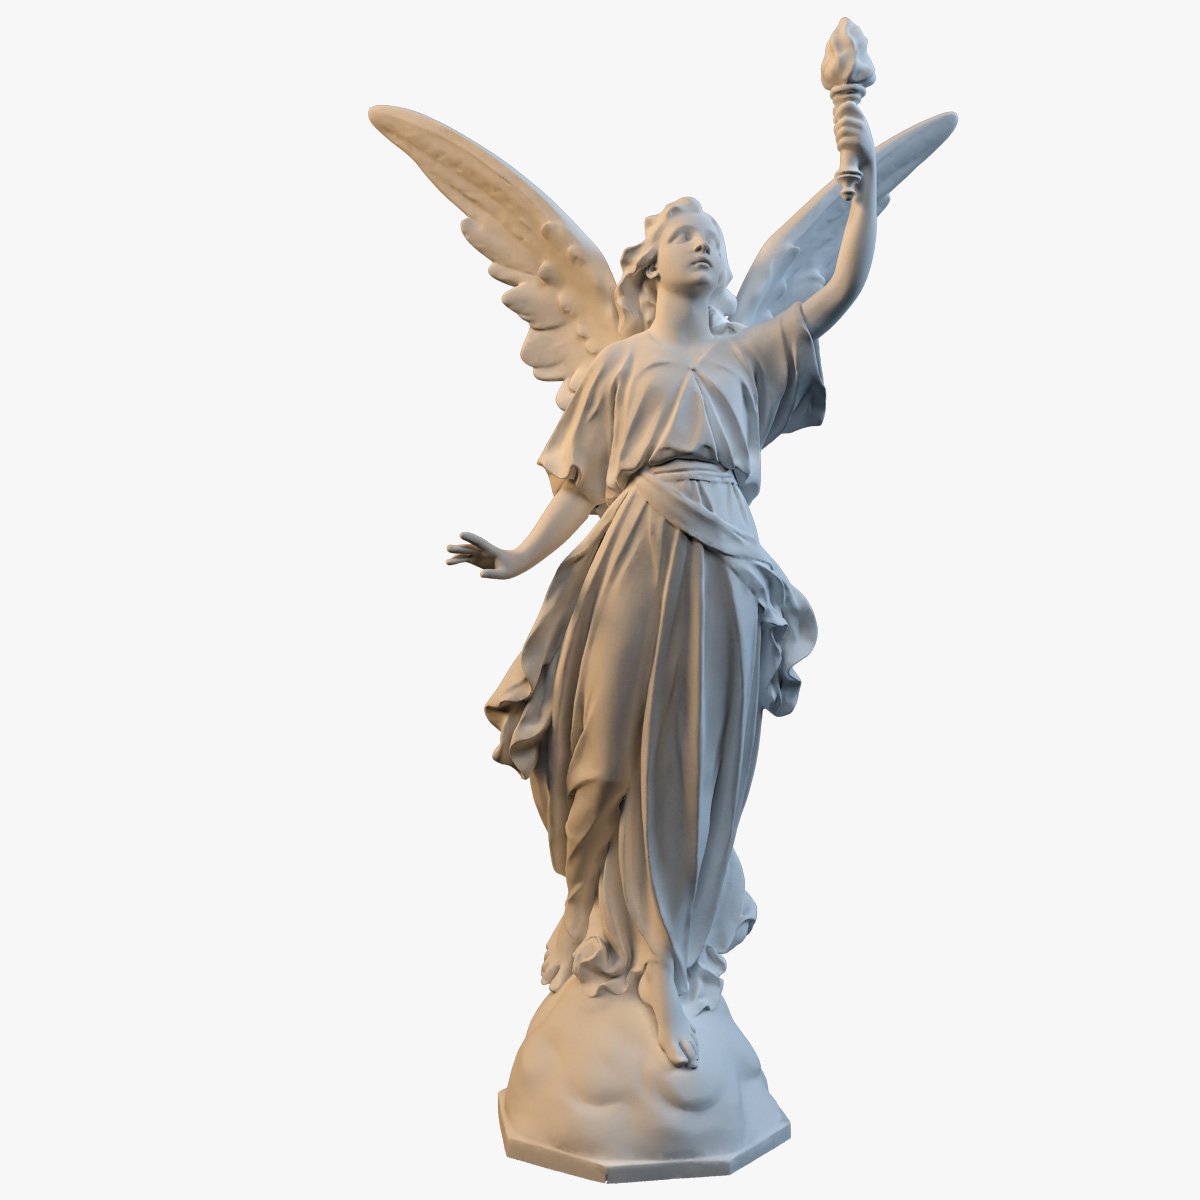 Goddess Of Victory 3D Model in 